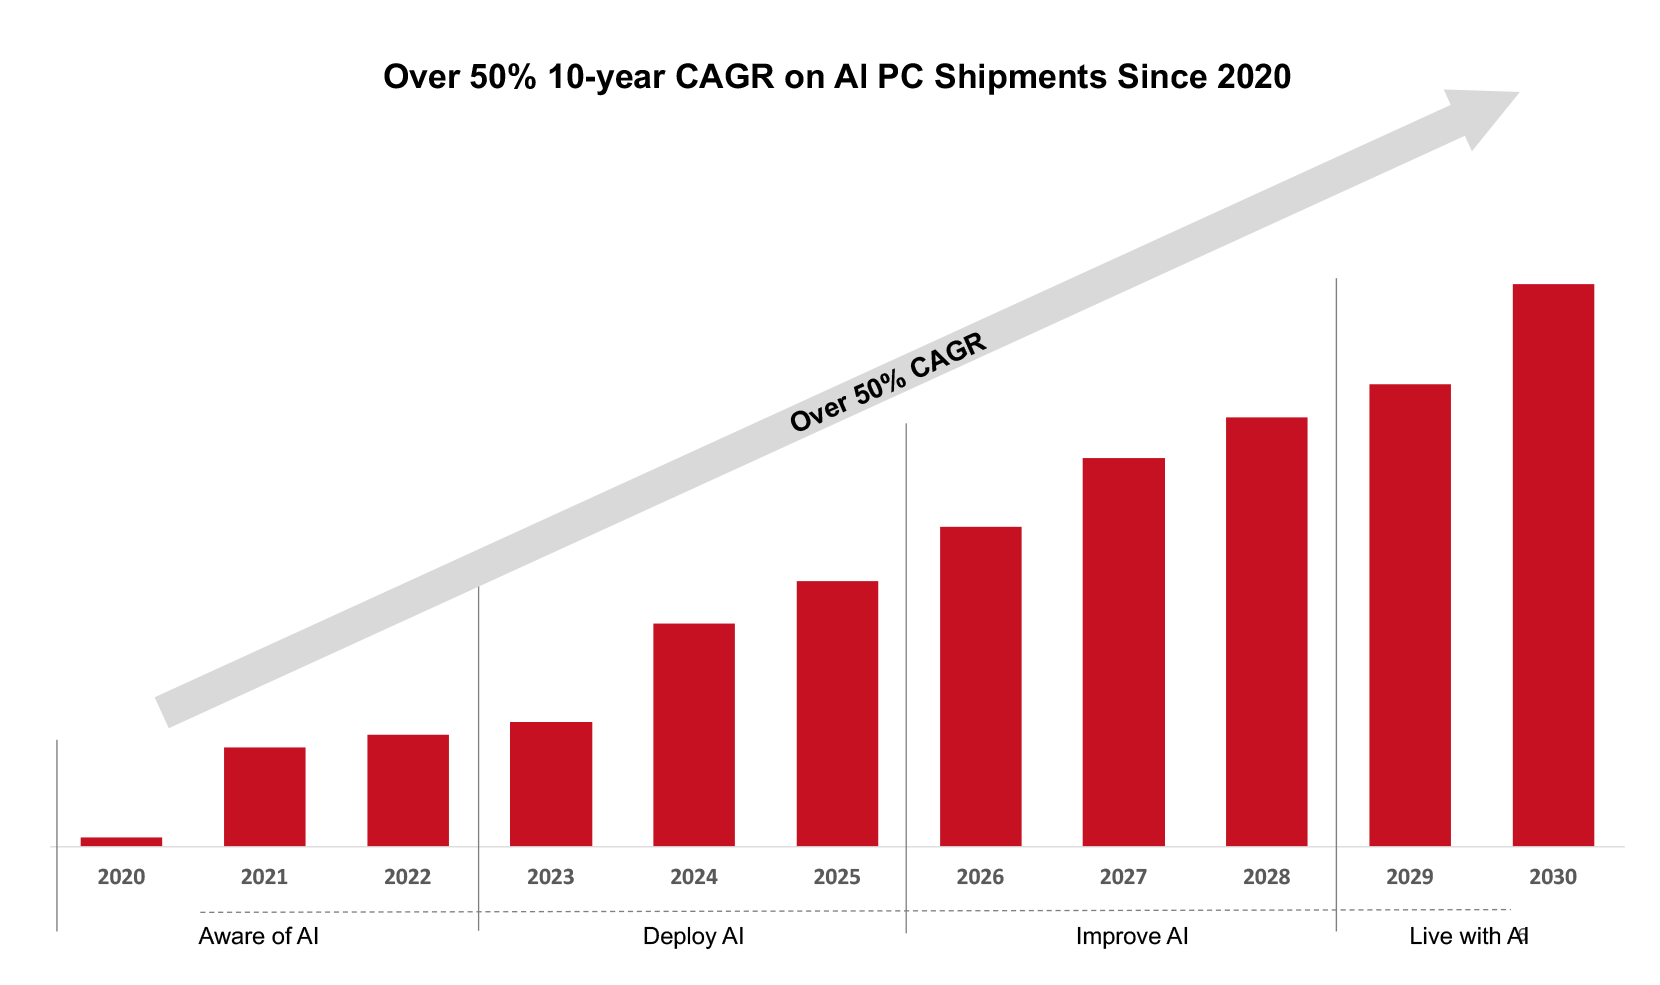 A Chart Showing Over 50% 10 Year CAGR on AI PC Shipments Since 2020